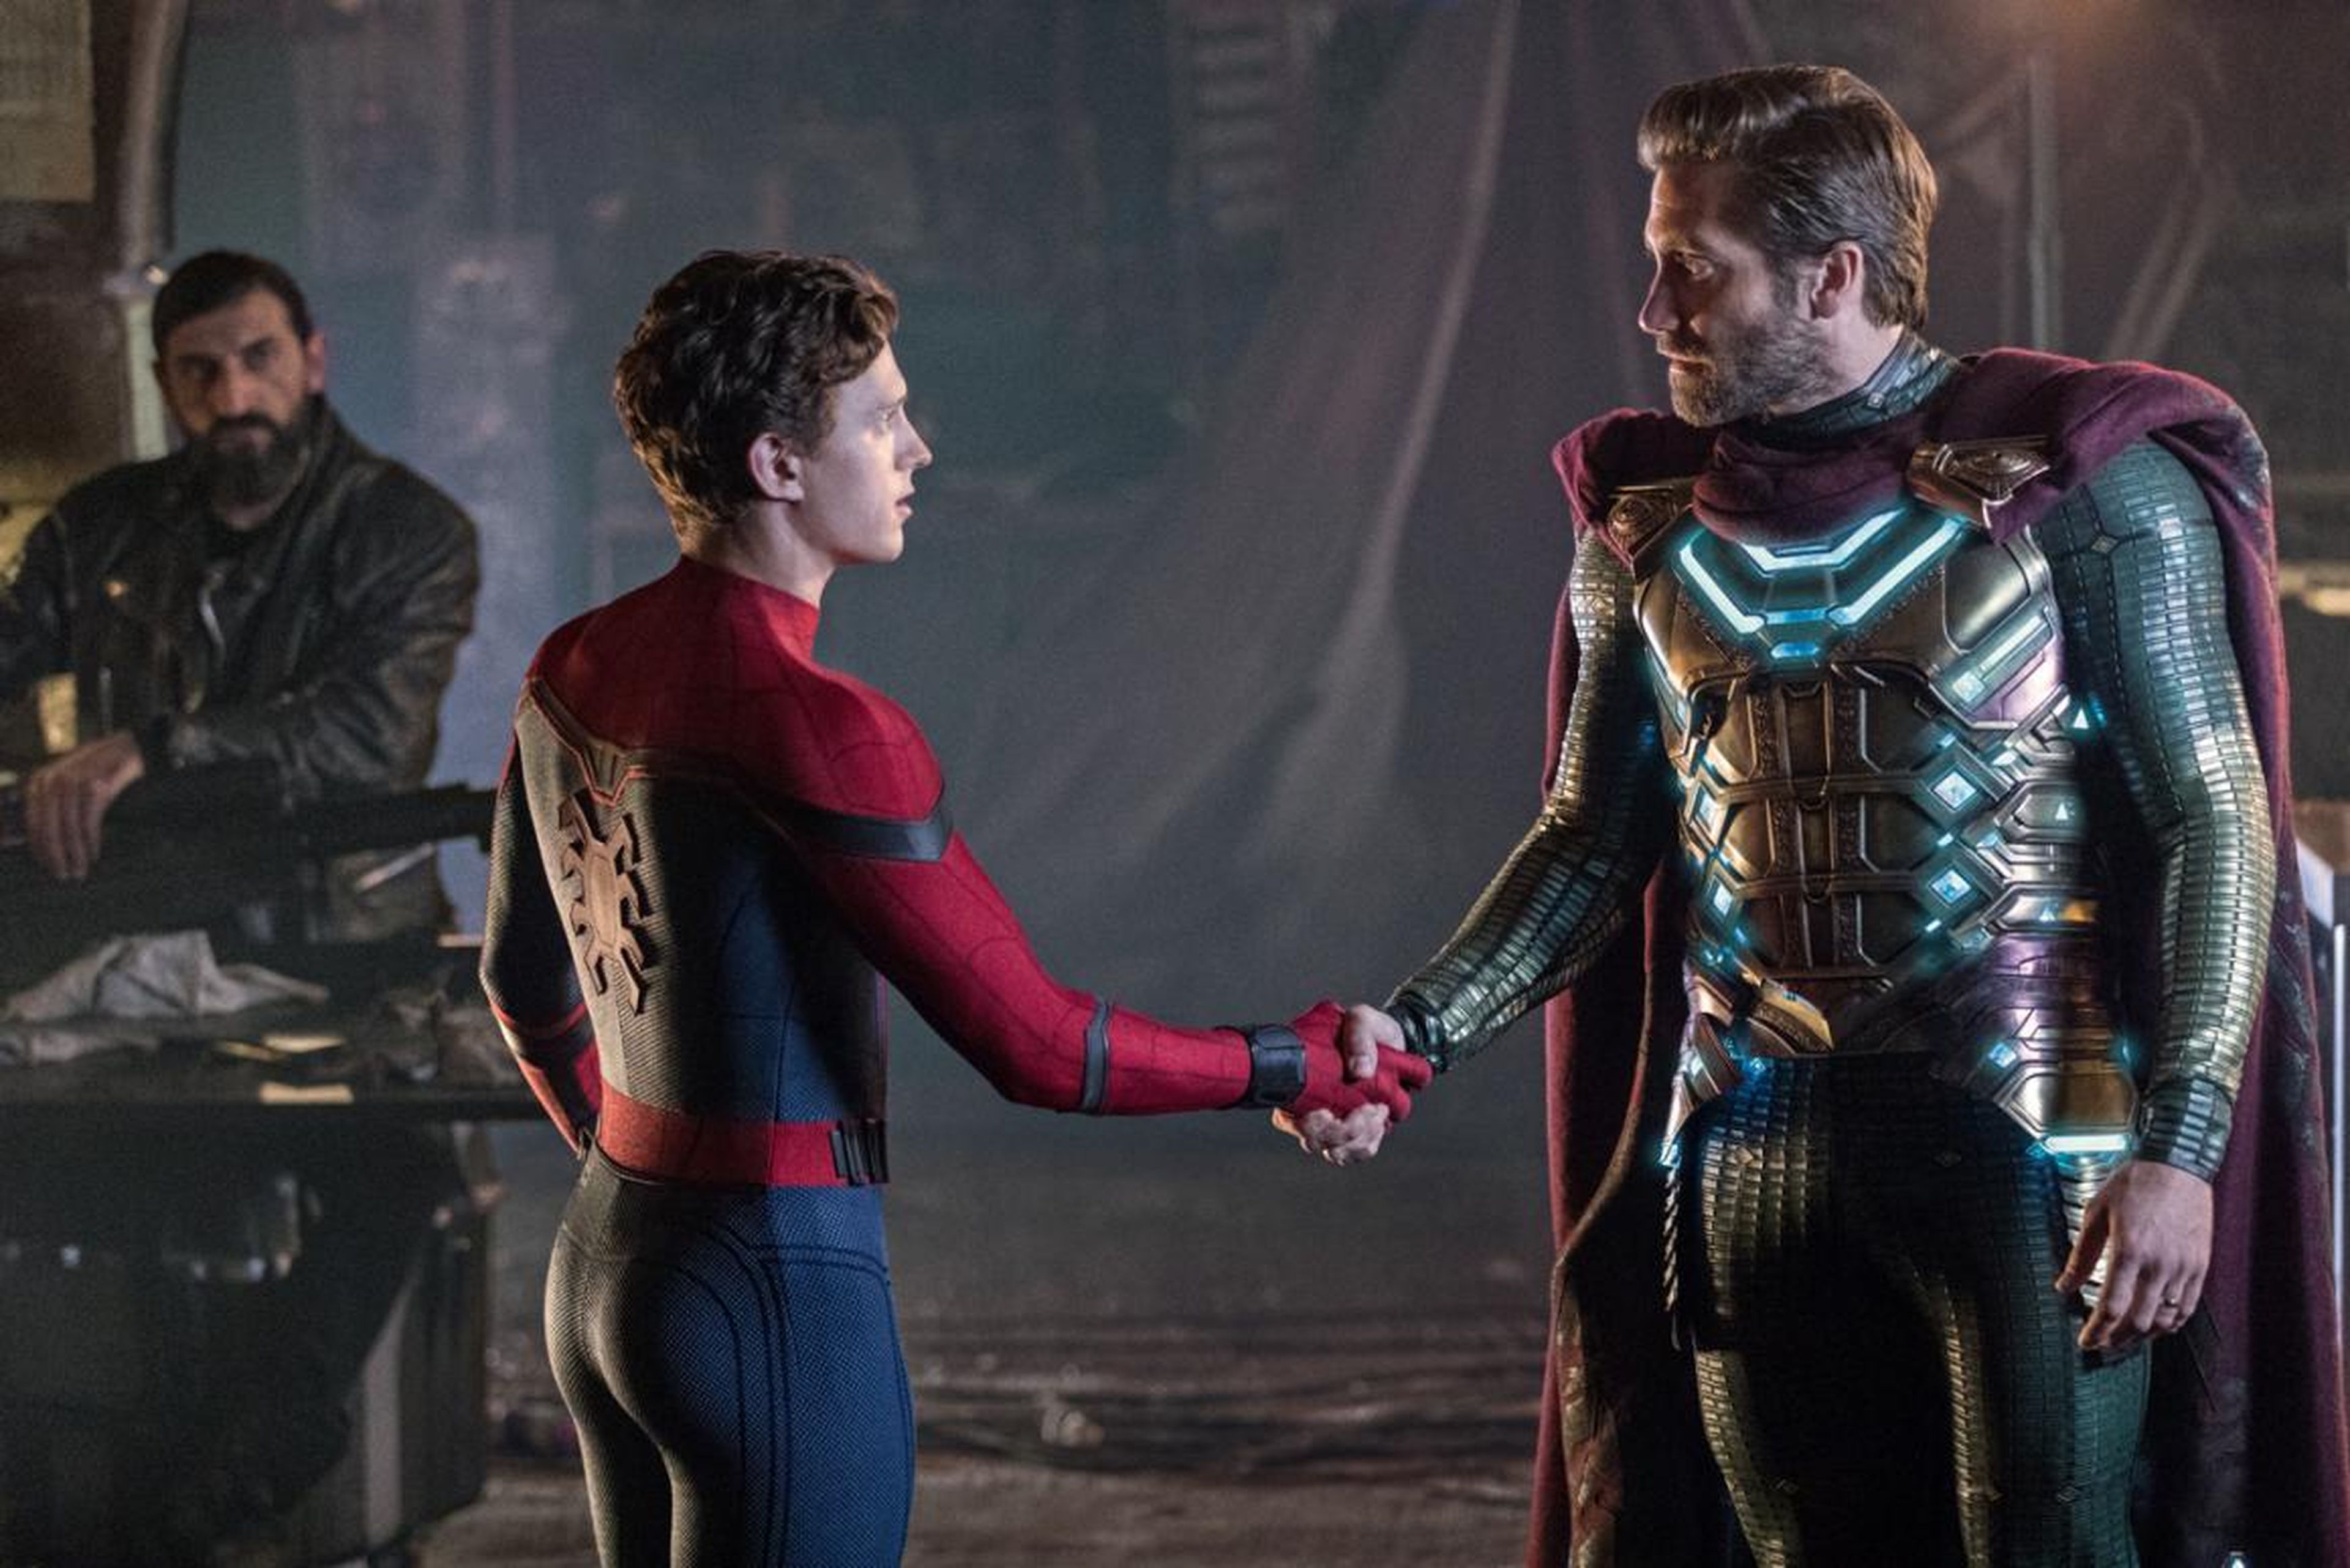 8. "Spider-Man: Far From Home" (2019)